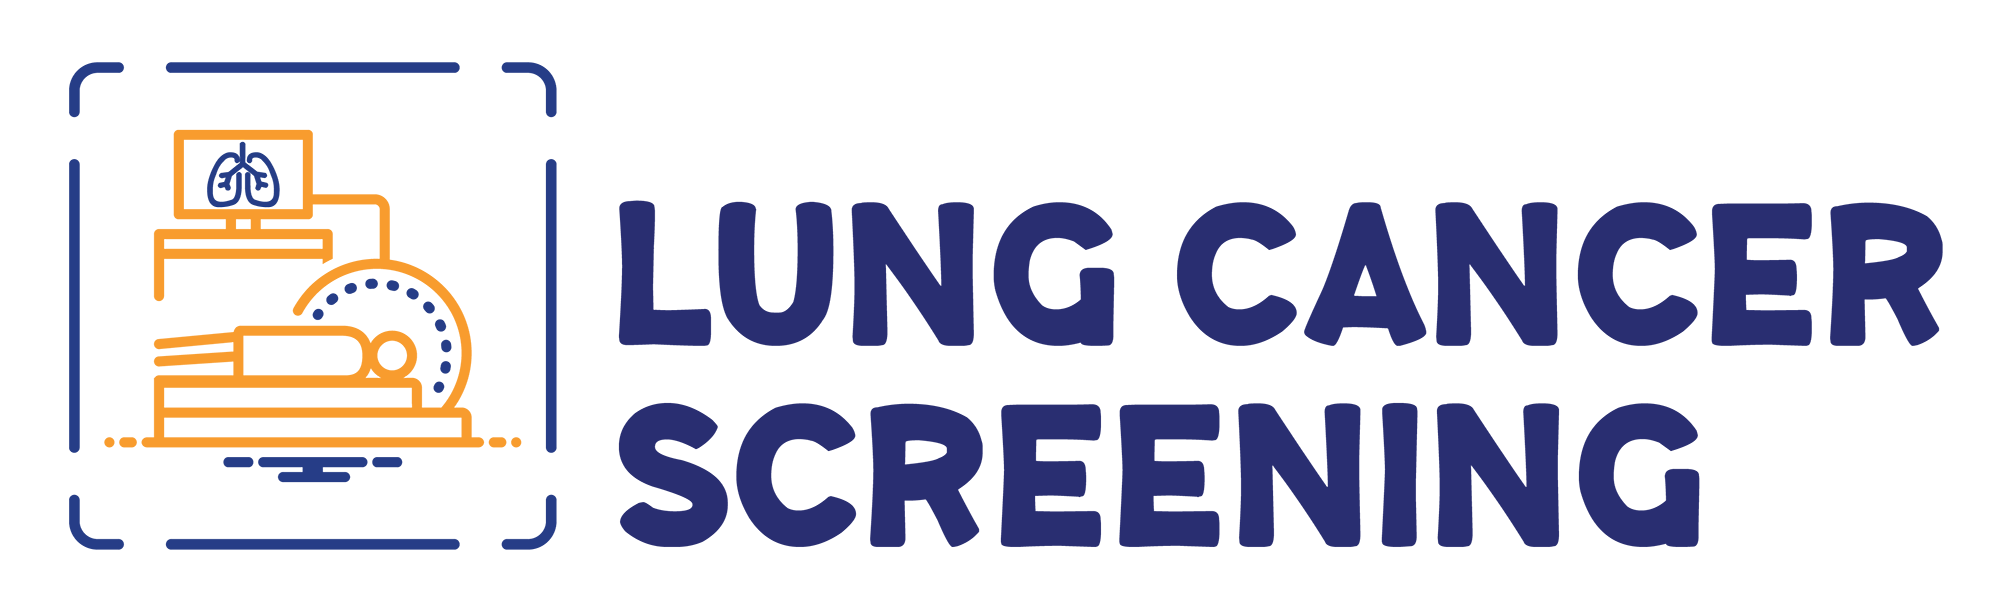 Lung Cancer Screening, American Radiology